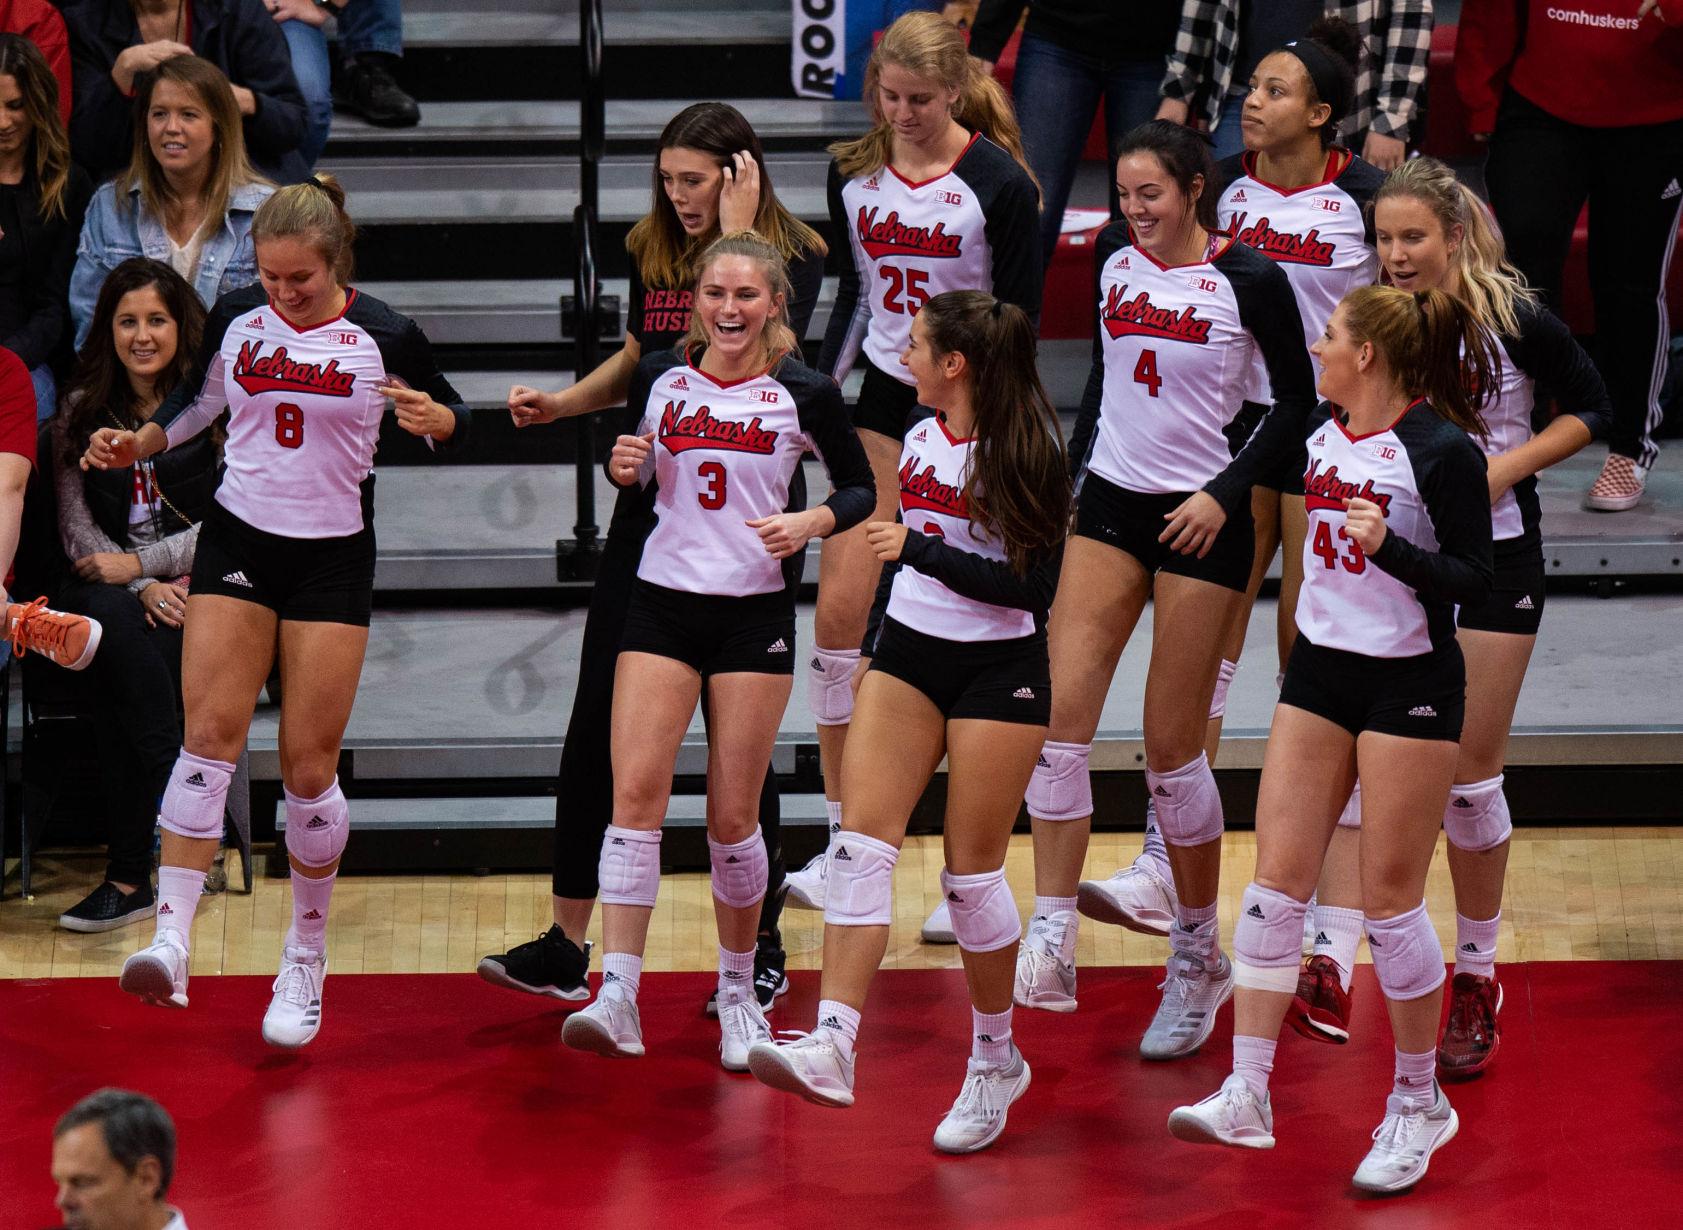 A montage of the Husker volleyball team's line dance Huskers